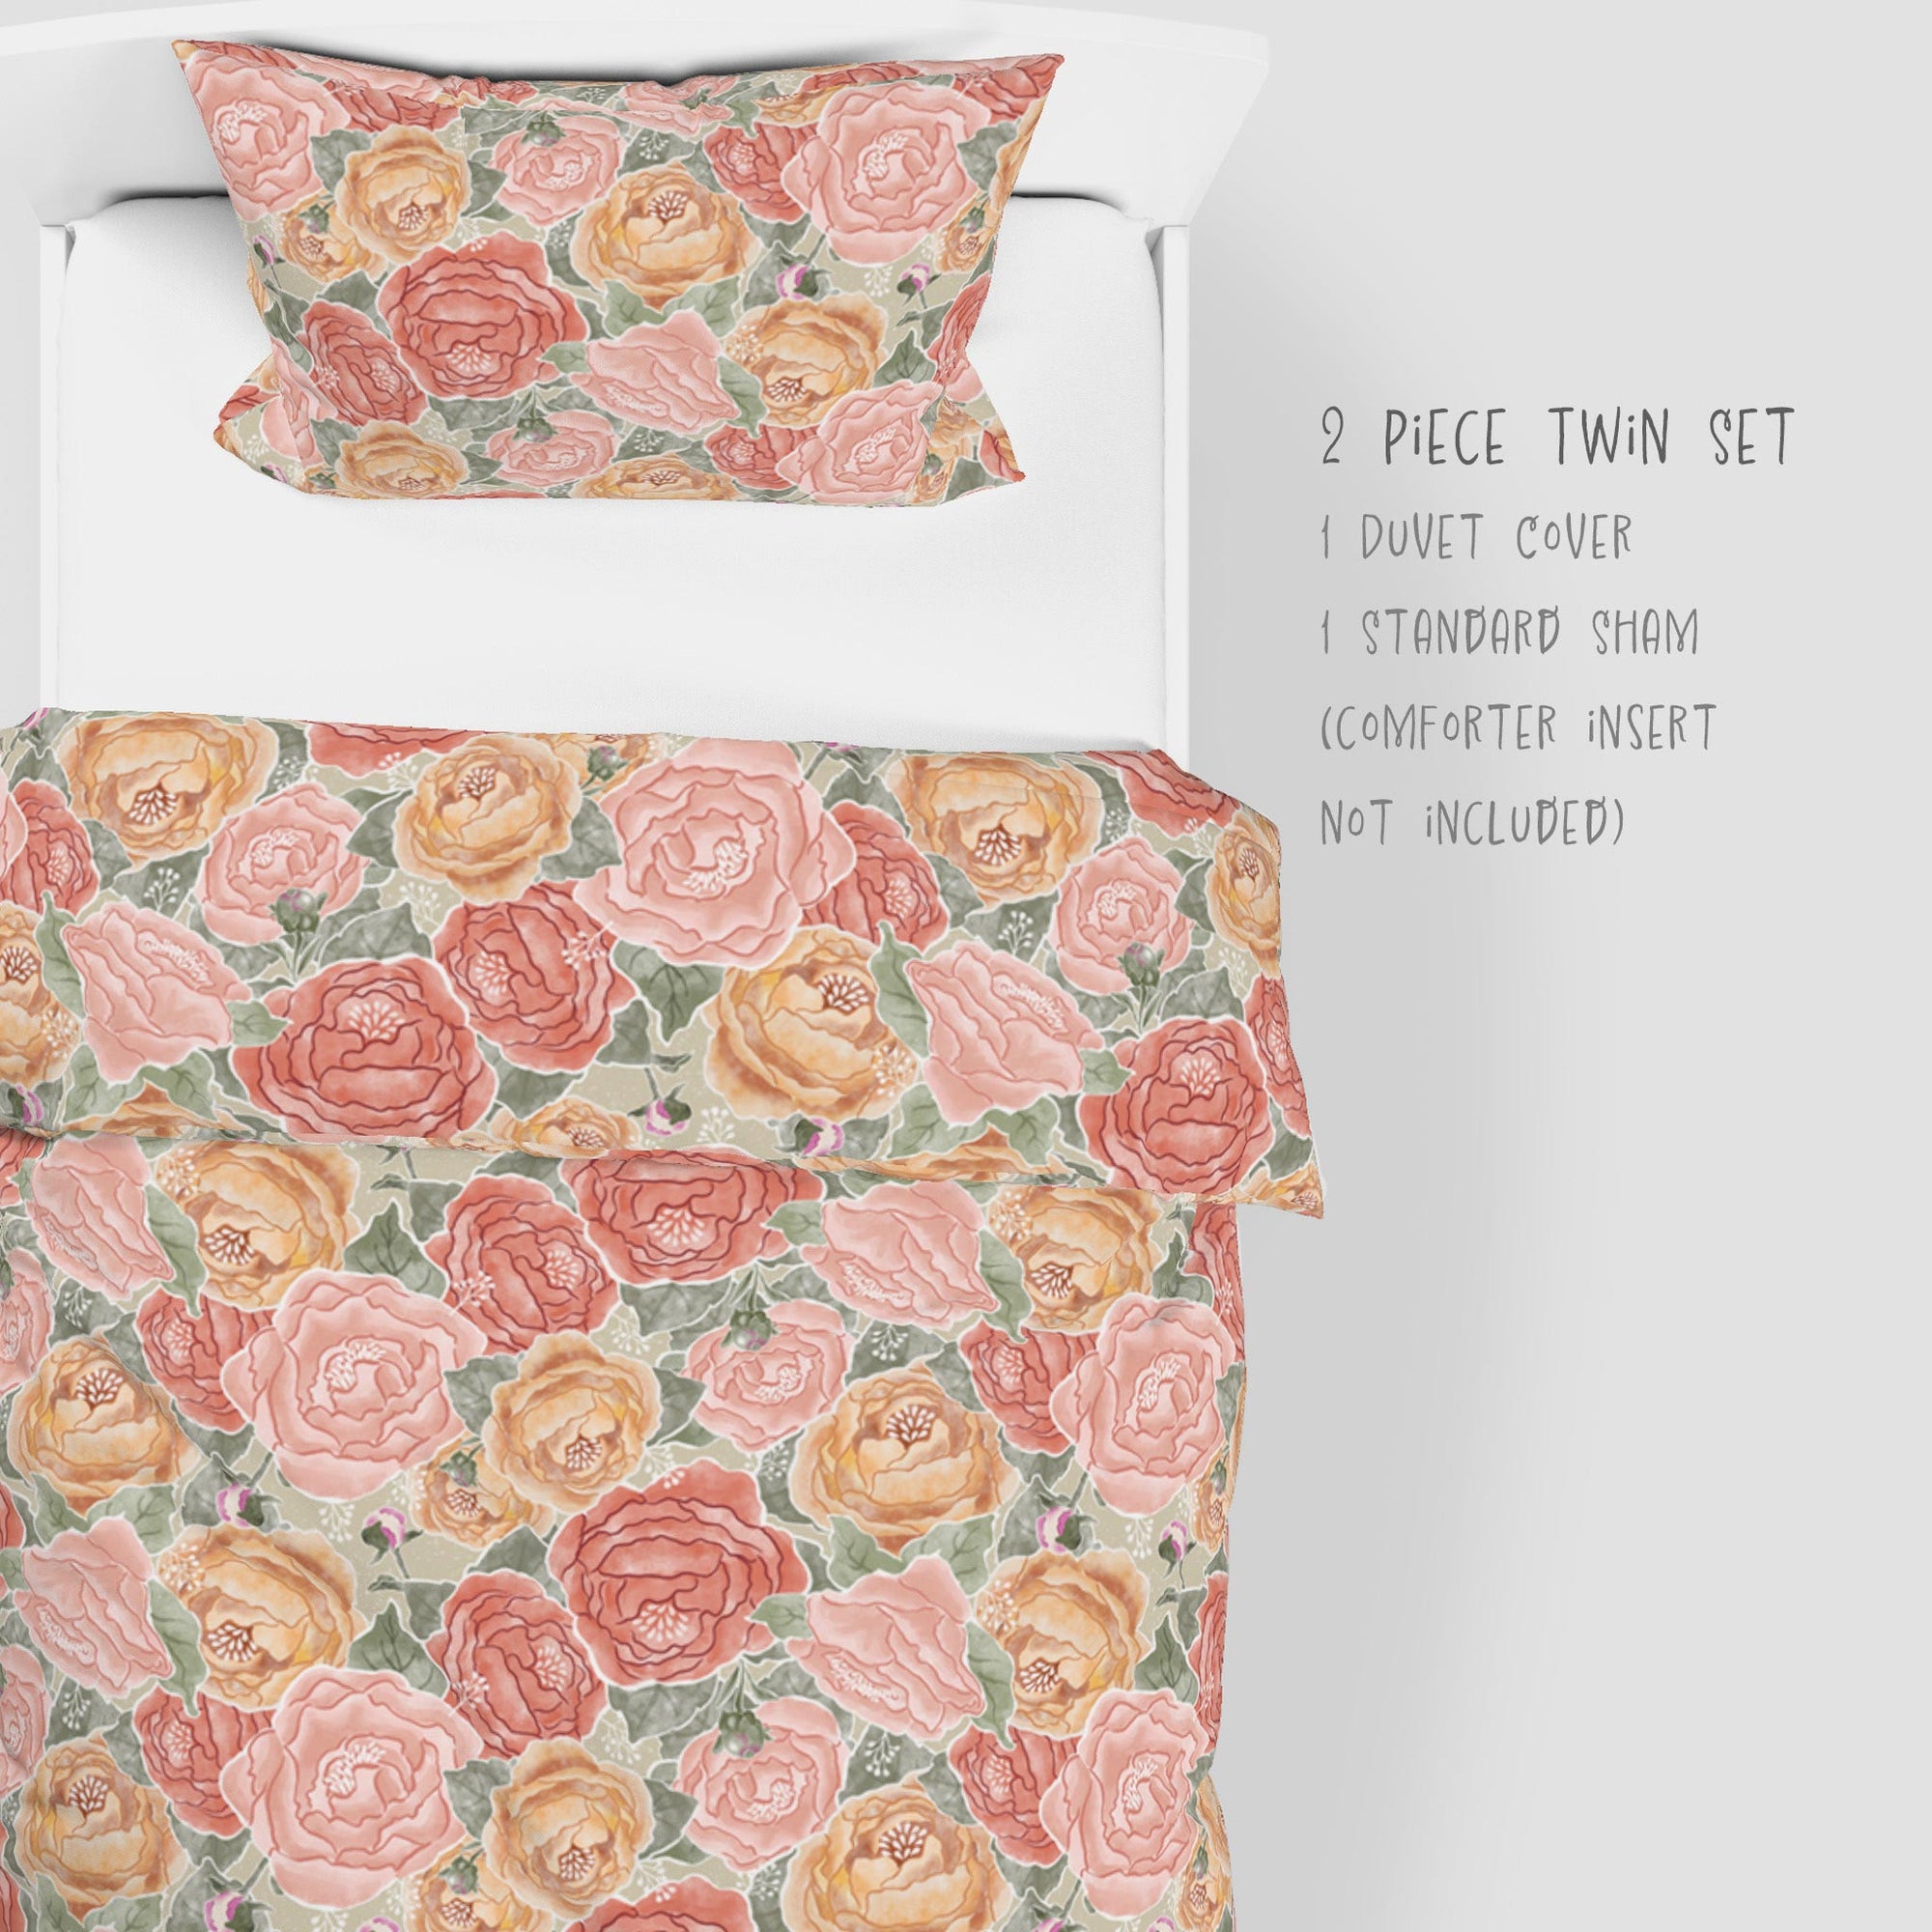 Pretty in Peony Bedding Collection with Amber Background. Twin comes as a 2 piece set: 1 sham and duvet or as 4 piece set: 1 sham, duvet, 1 throw pillow, and 1 lumbar